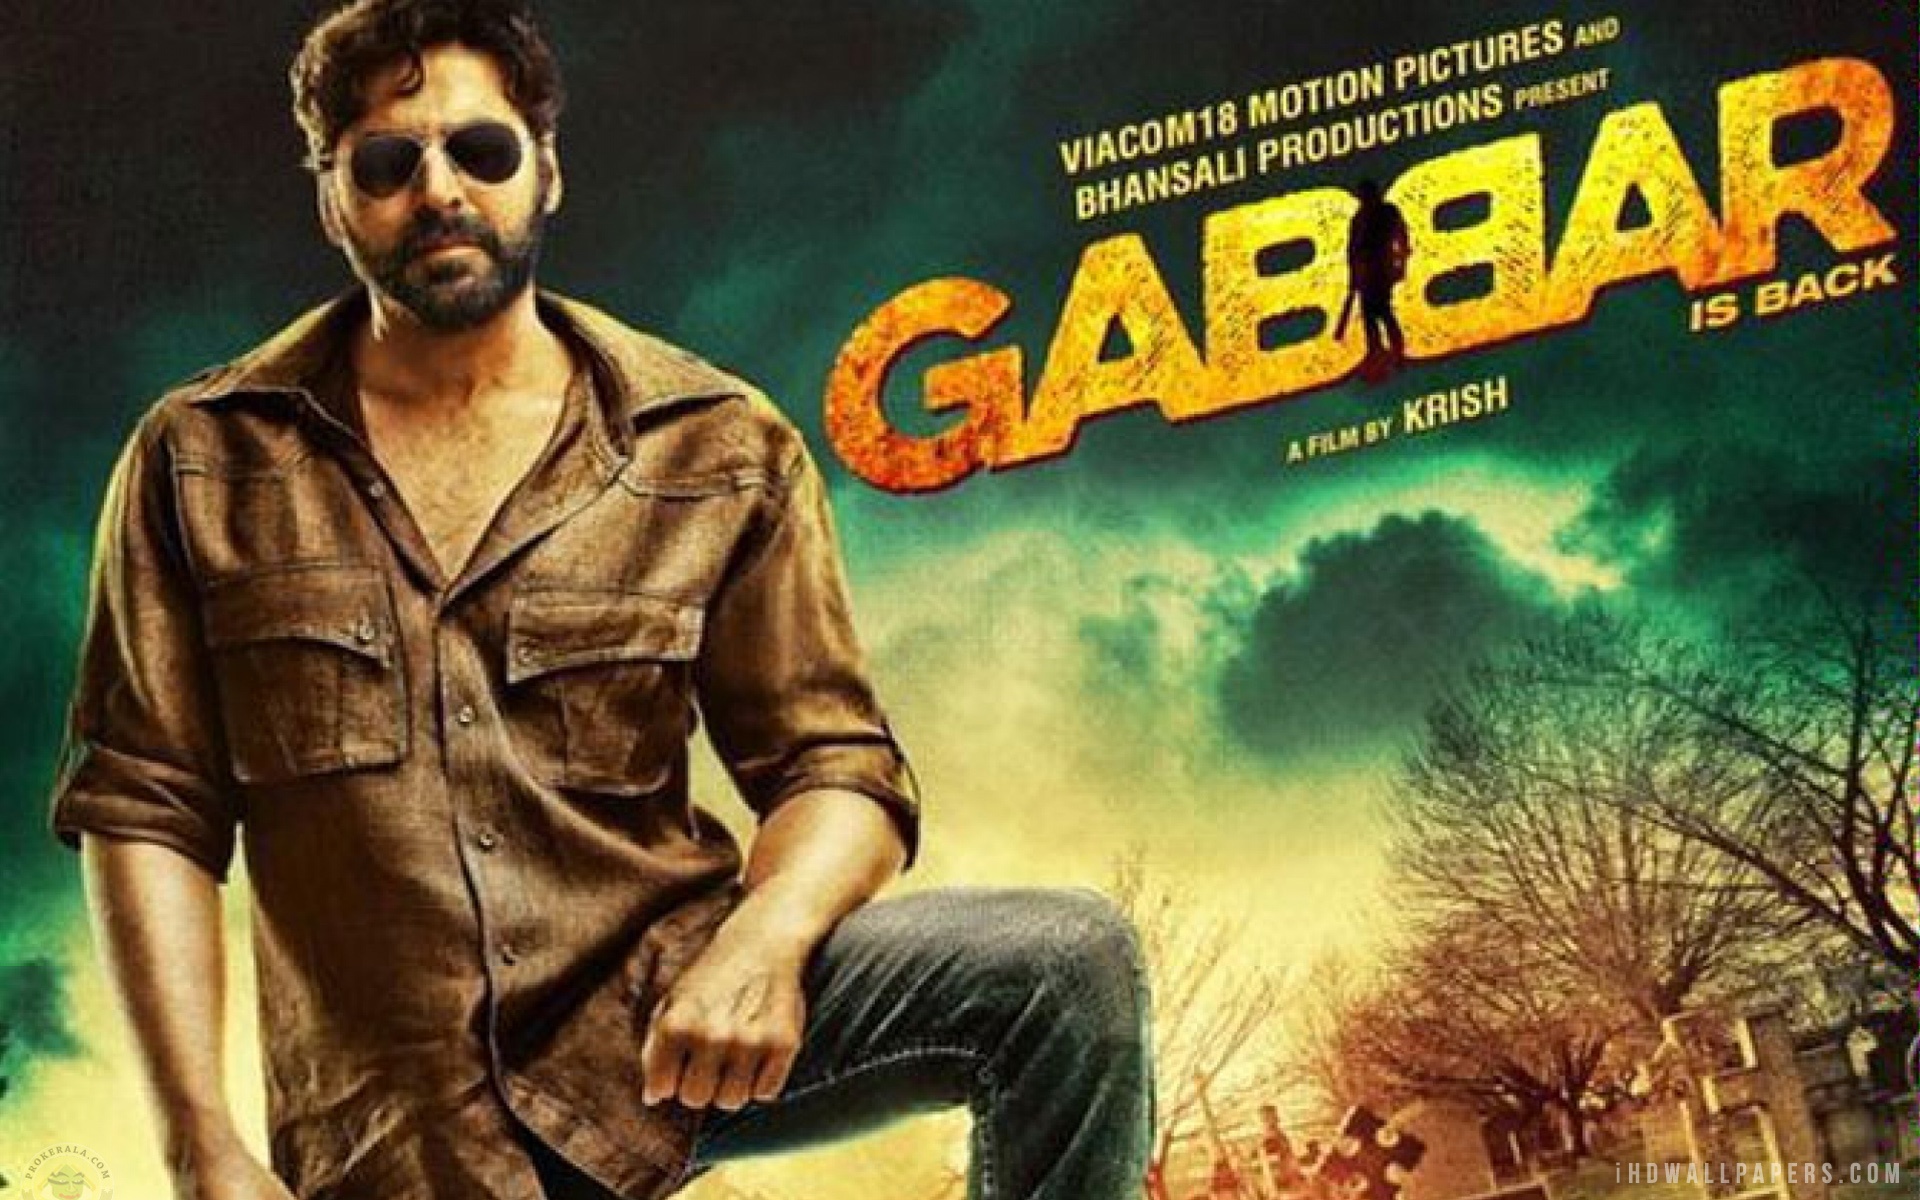 Download wallpaper for 1280x960 resolution | Akshay Kumar in Gabbar is Back  | movies and tv series | Wallpaper Better